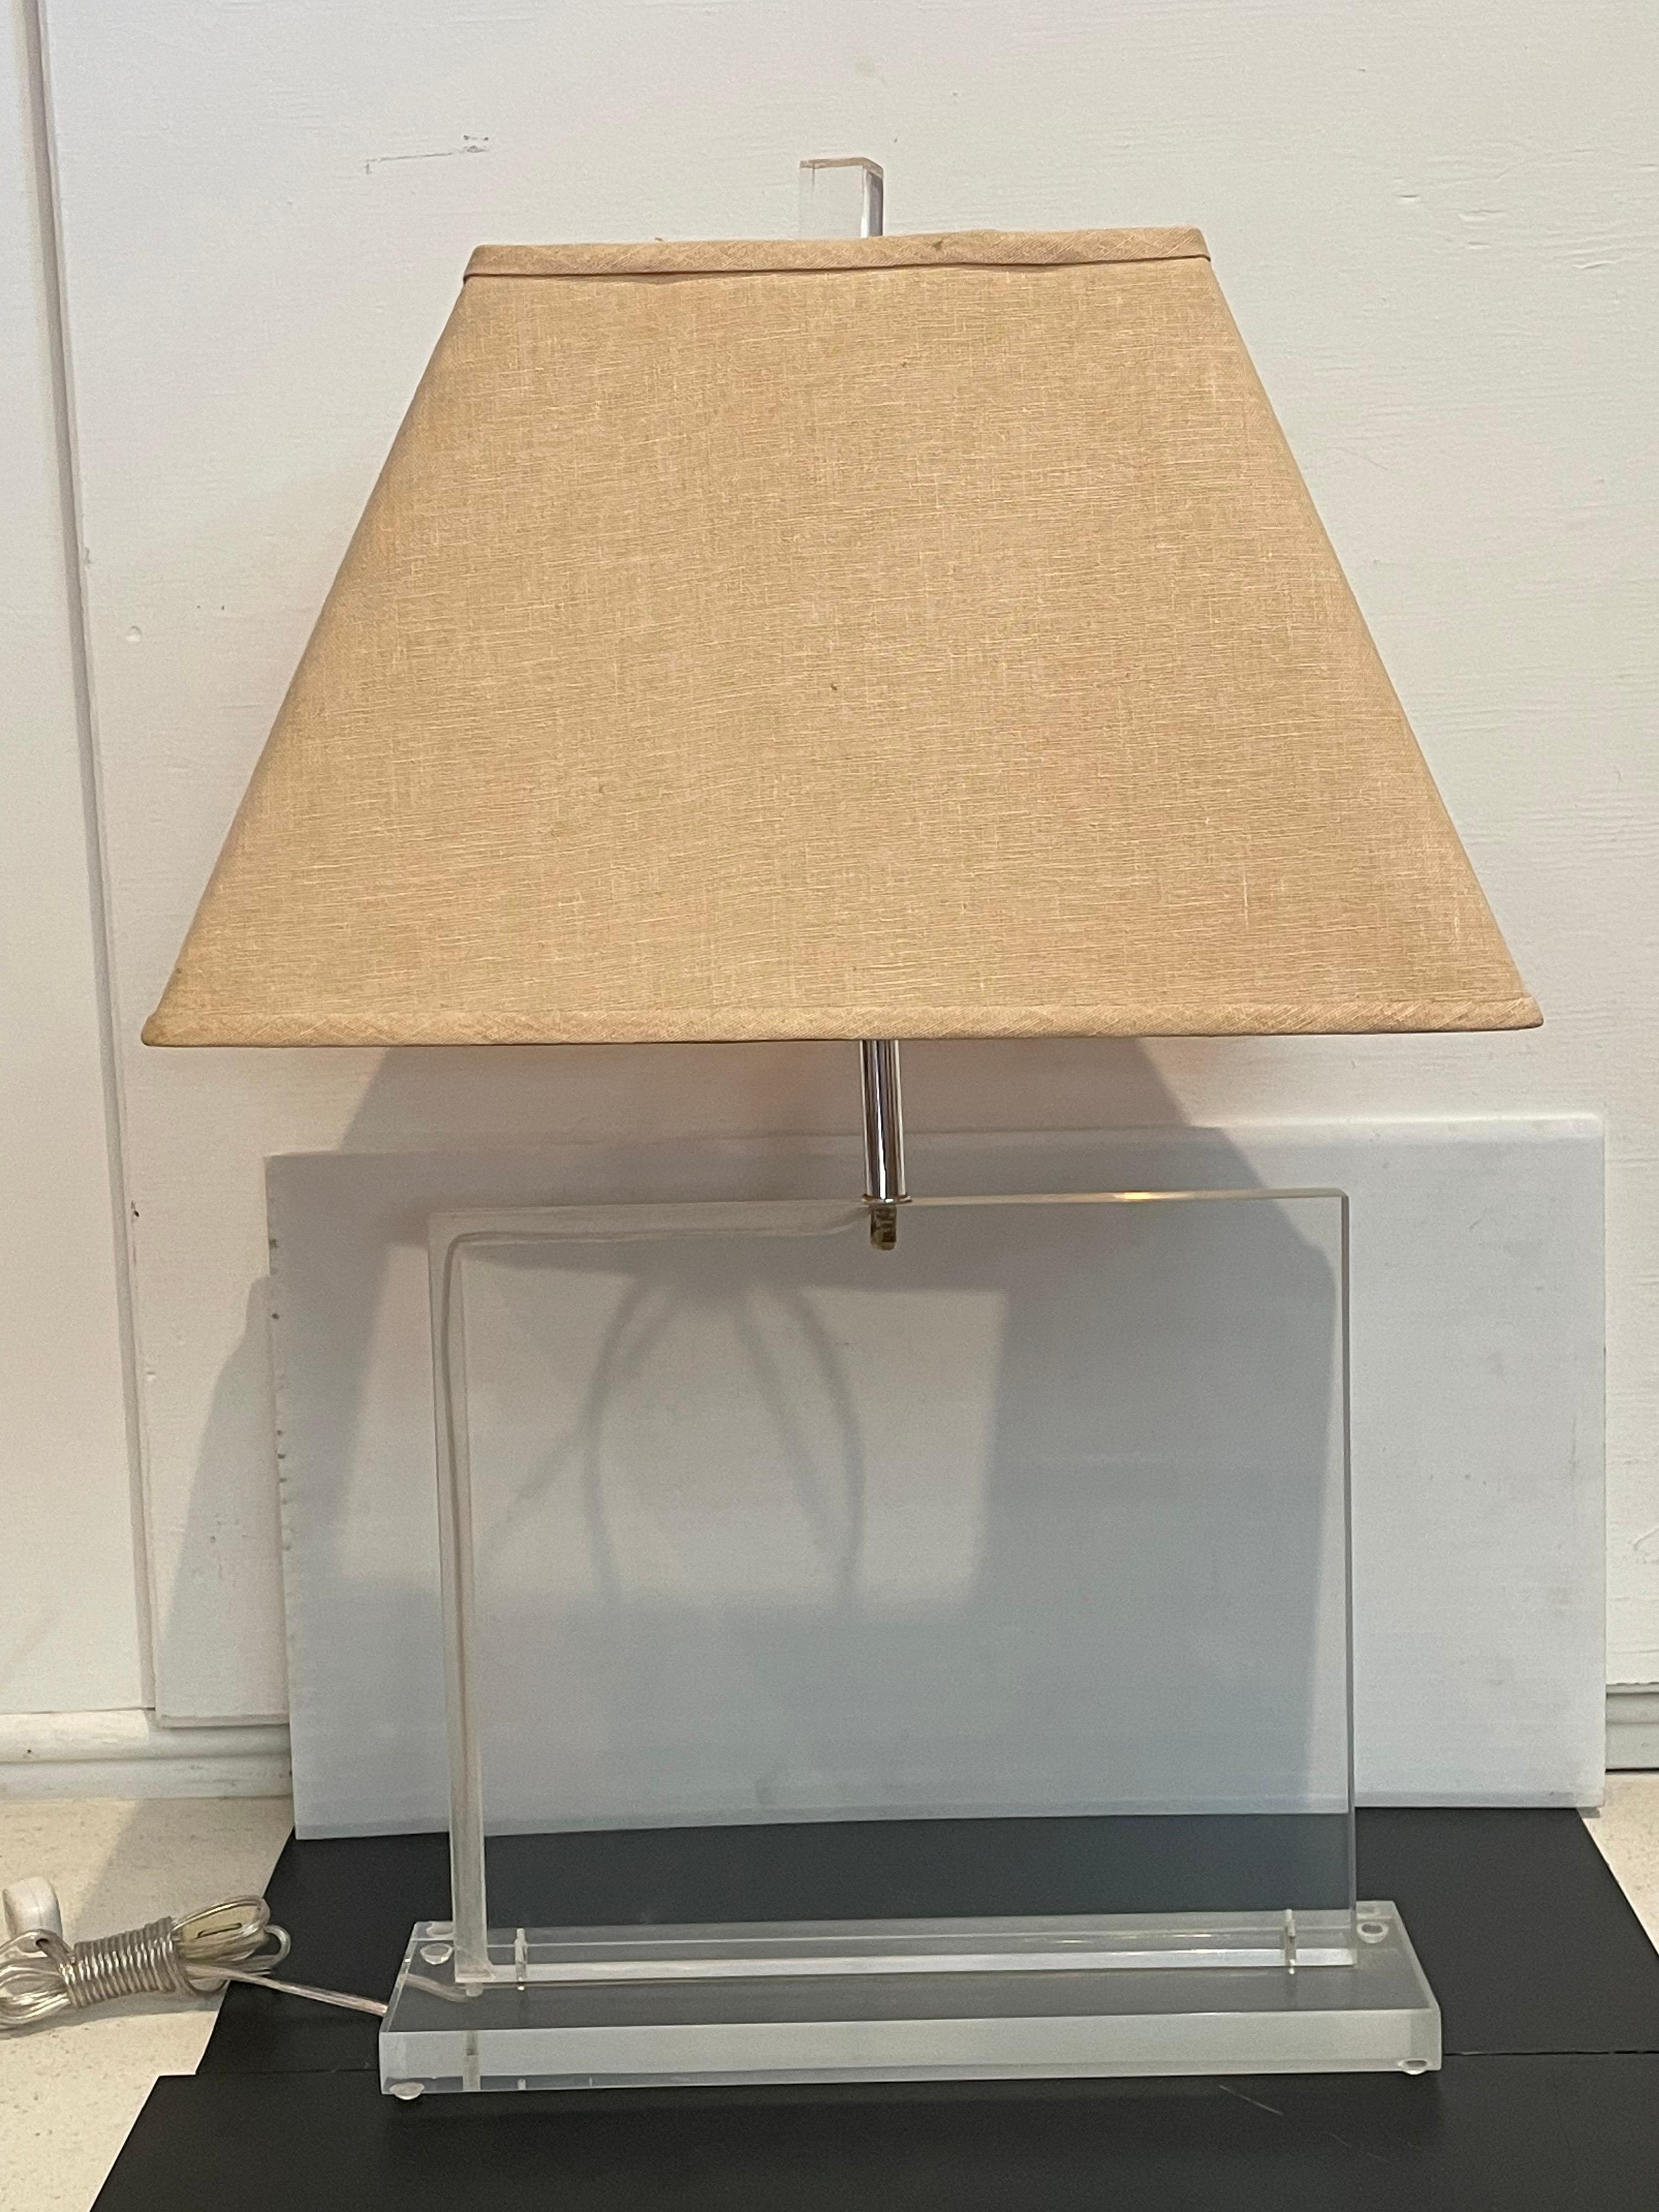 1960s solid square Lucite lamp with finial Lucite top, the lampshade it’s not included not in good condition. We polished and rewired the lamp it’s a simple elegant design. Shows some fogging due to age the cord its hidden on the edge, circa 1960s.